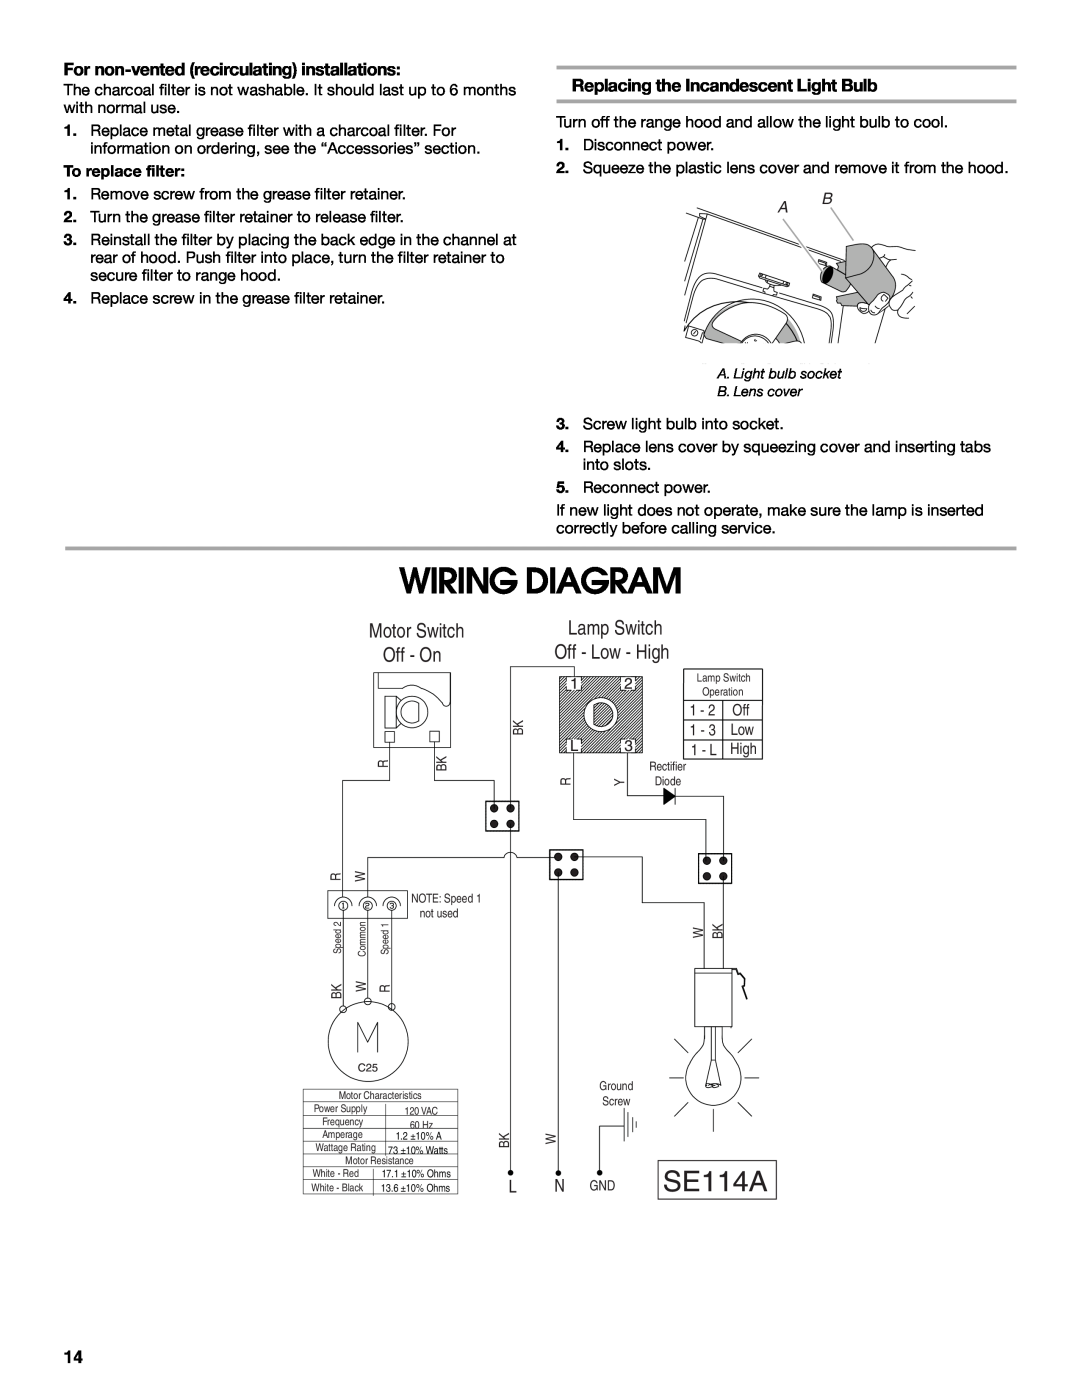 Whirlpool UXT4236AD Wiring Diagram, SE114A, Motor Switch Off - On, Lamp Switch, For non-ventedrecirculating installations 